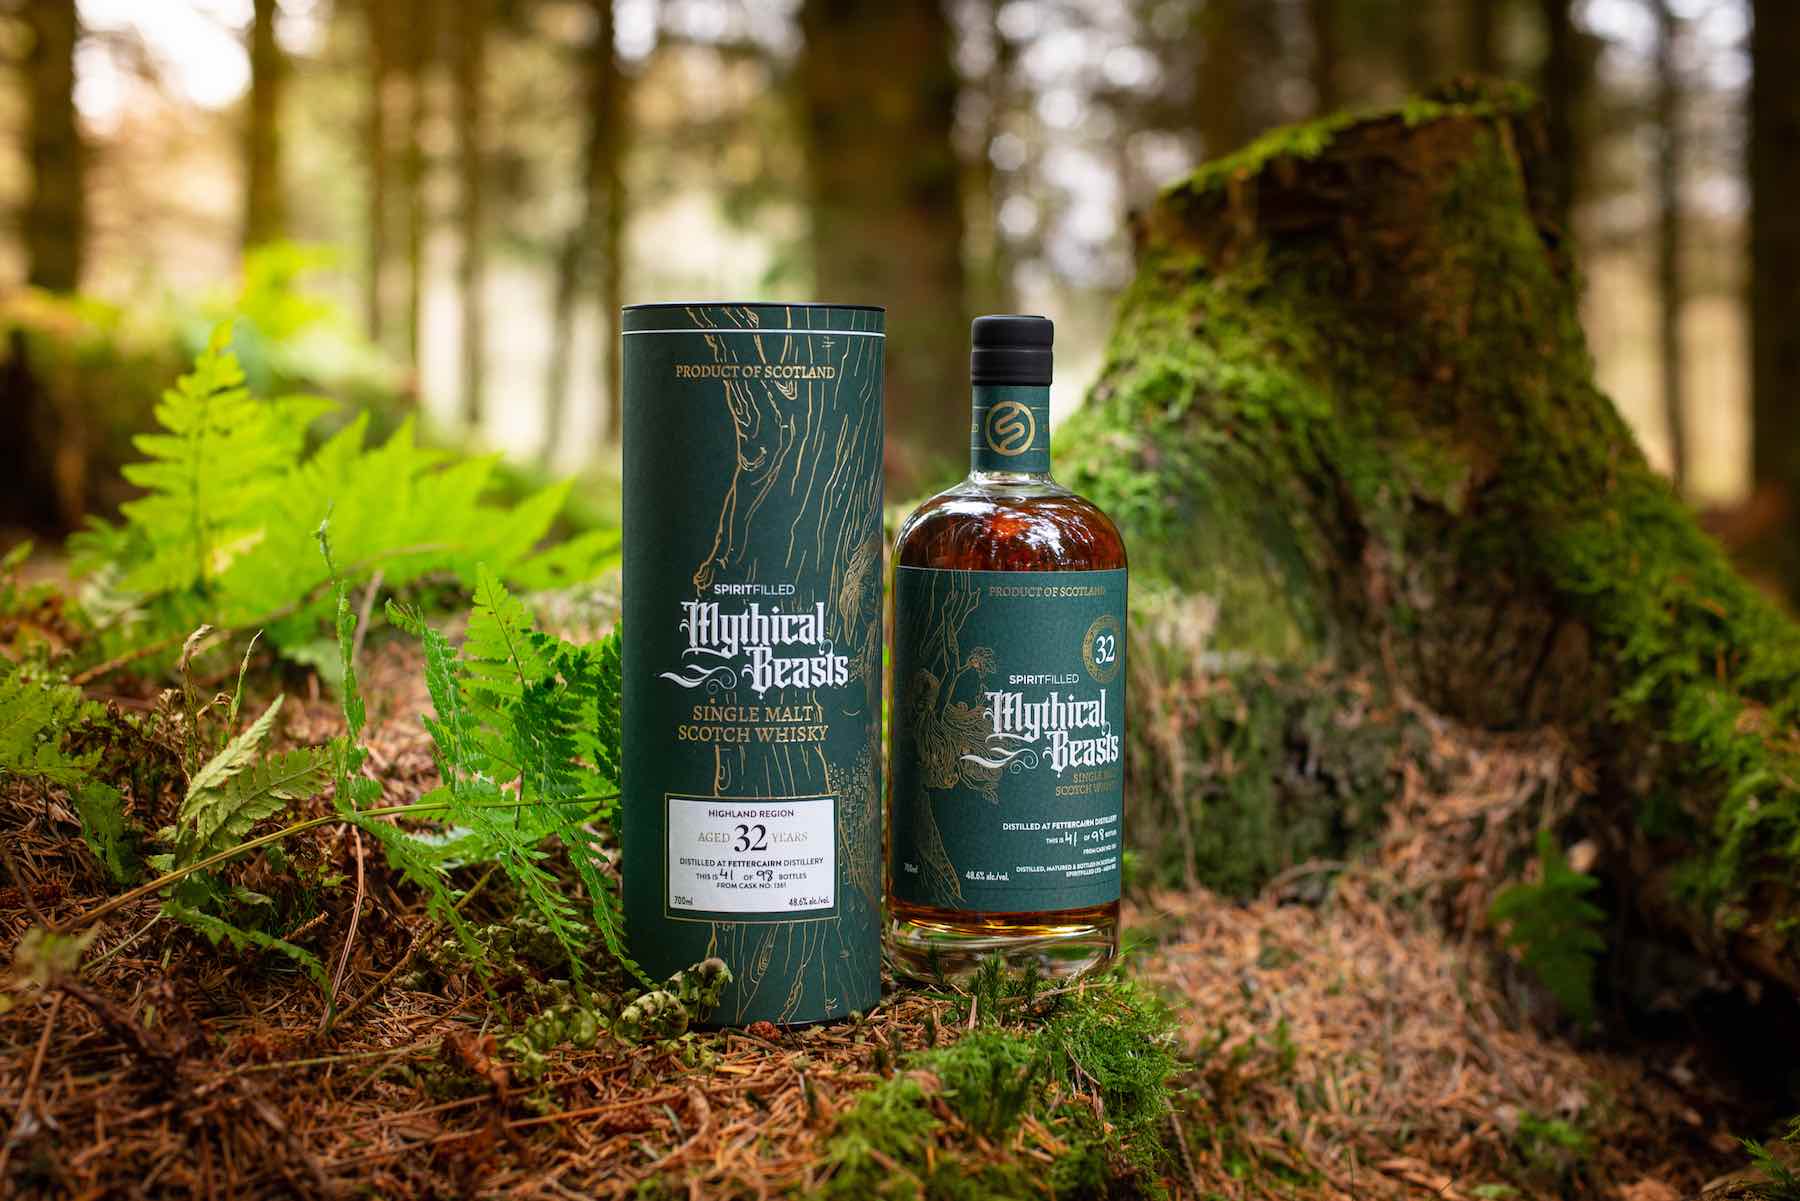 Spiritfilled's Mythical Beasts Fettercairn 32 and Glenrothes 15